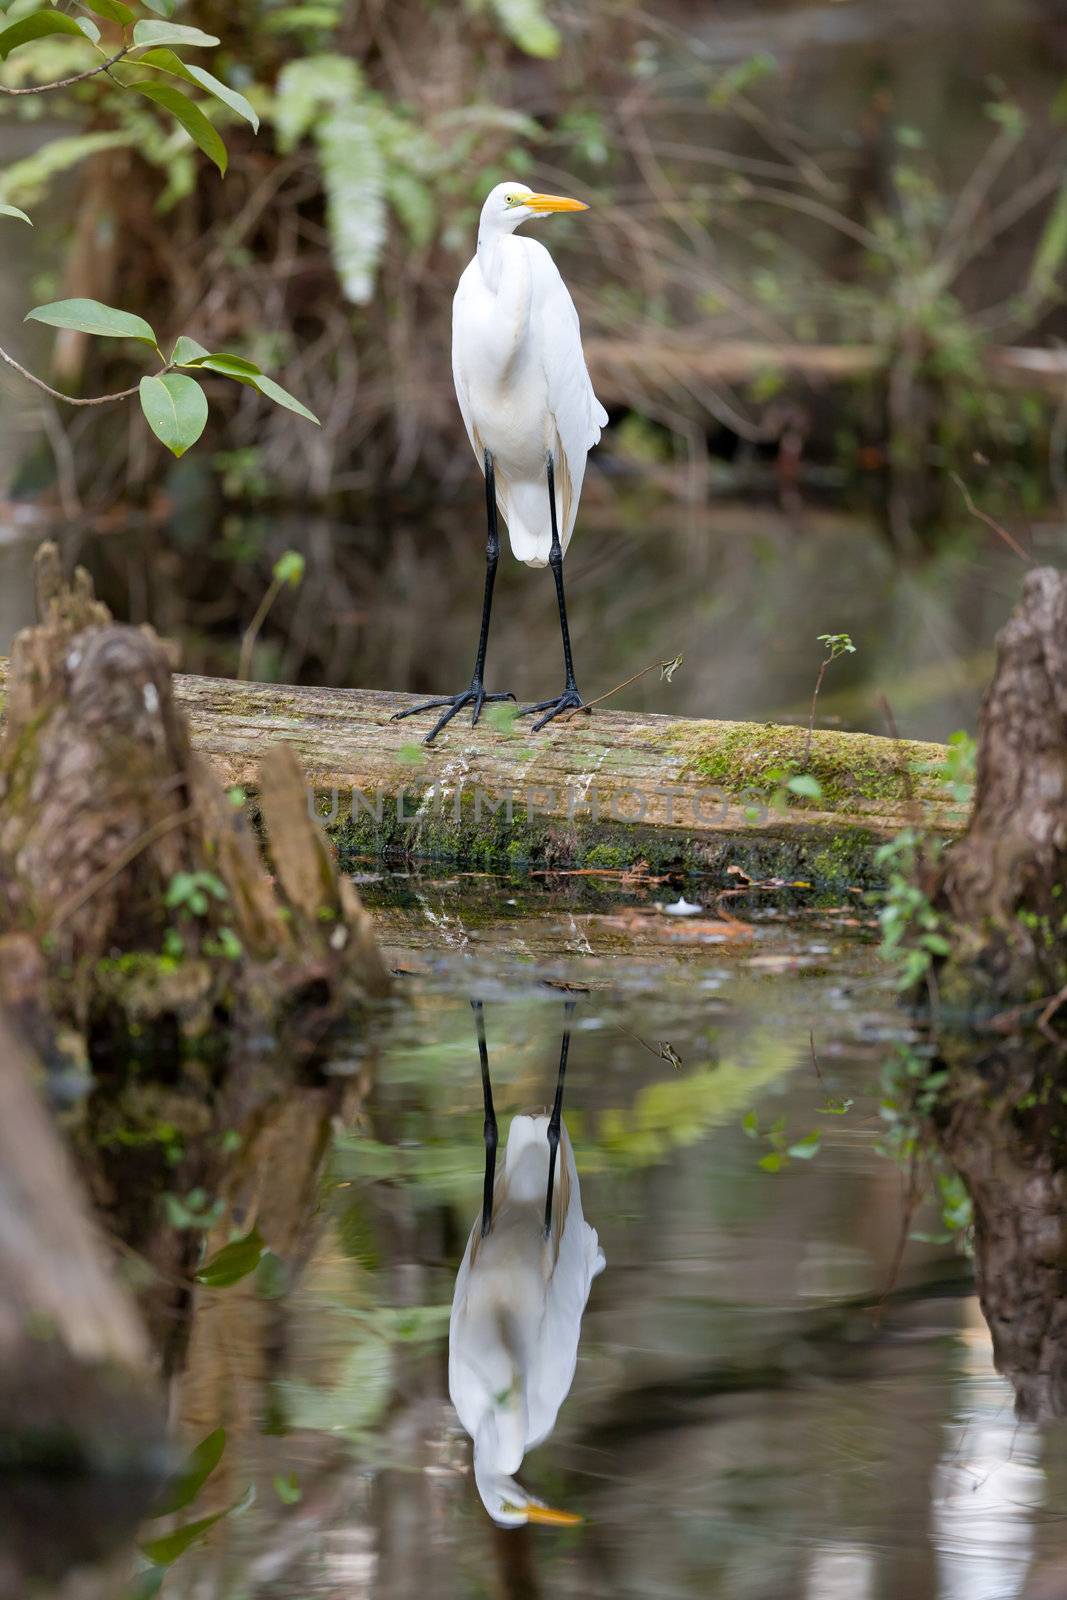 Great Egret Bird in the Everglades by PPphoto